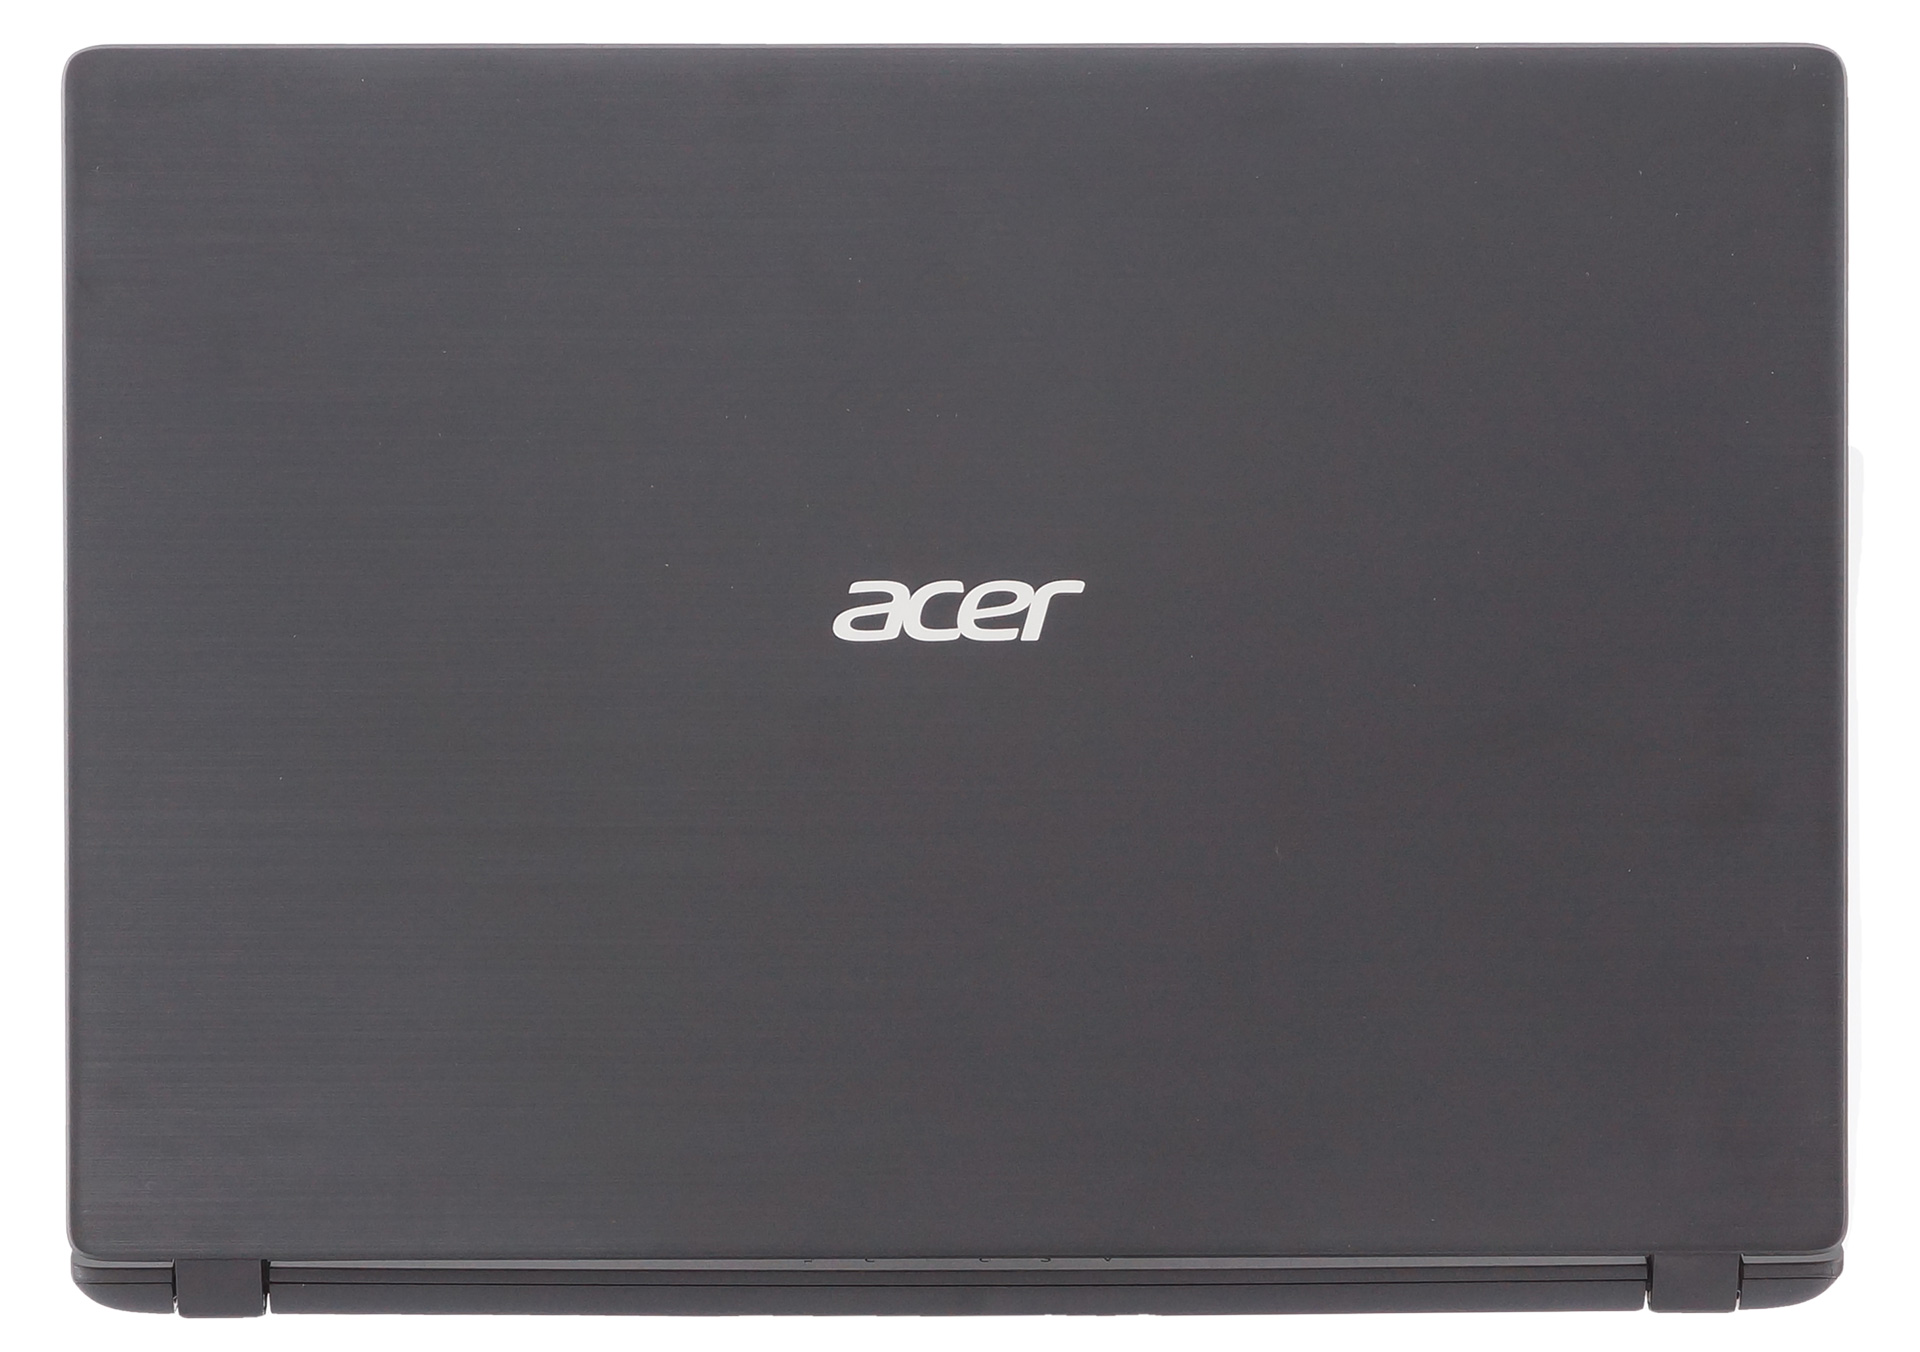 Top 5 Reasons to BUY or NOT buy the Acer Aspire 1 (A114-32 ...